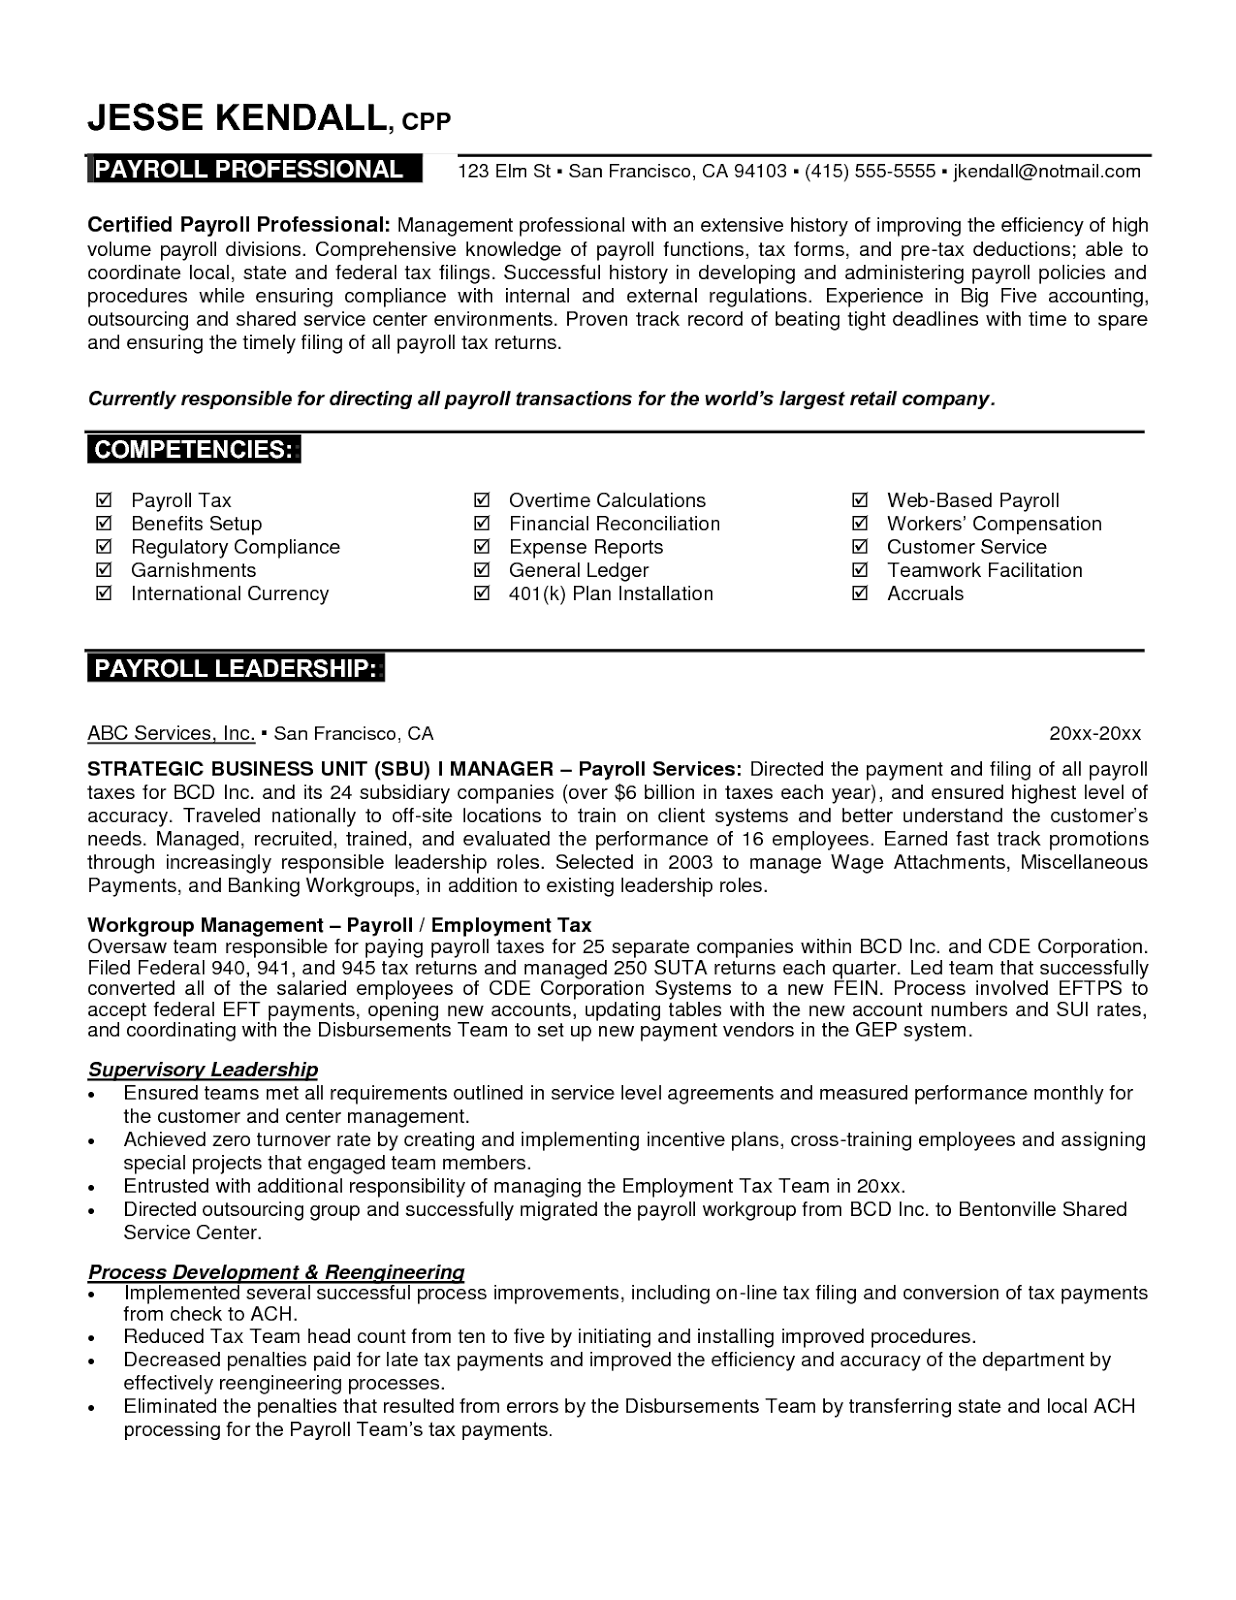 7 Samples of Professional Resumes